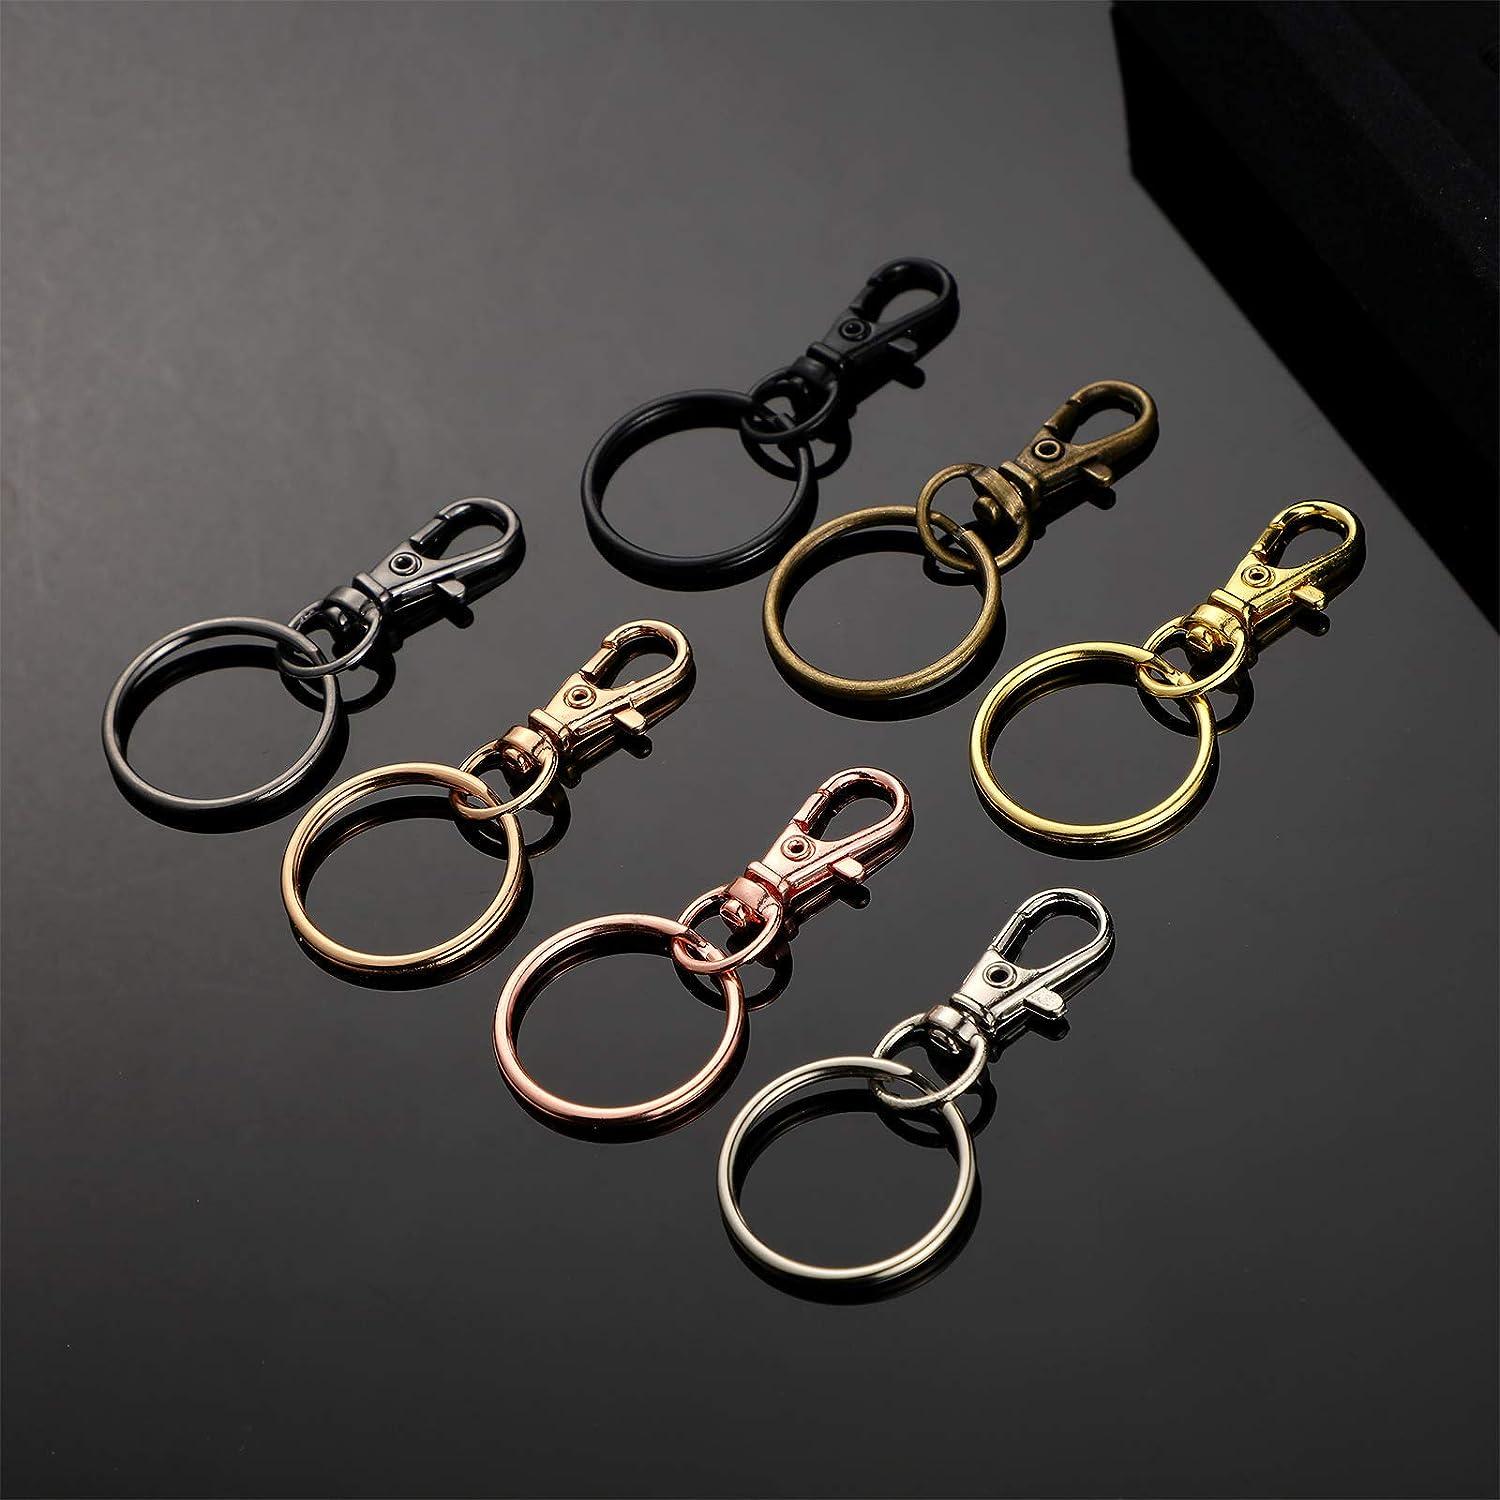 EORTA 50 Pcs 38mm Lobster Claw Clasp Stainless Steel Swivel Clasps Trigger Snap Hooks Landyard Clip Jewelry Findings for Keychain Sewing Craft DIY, Si